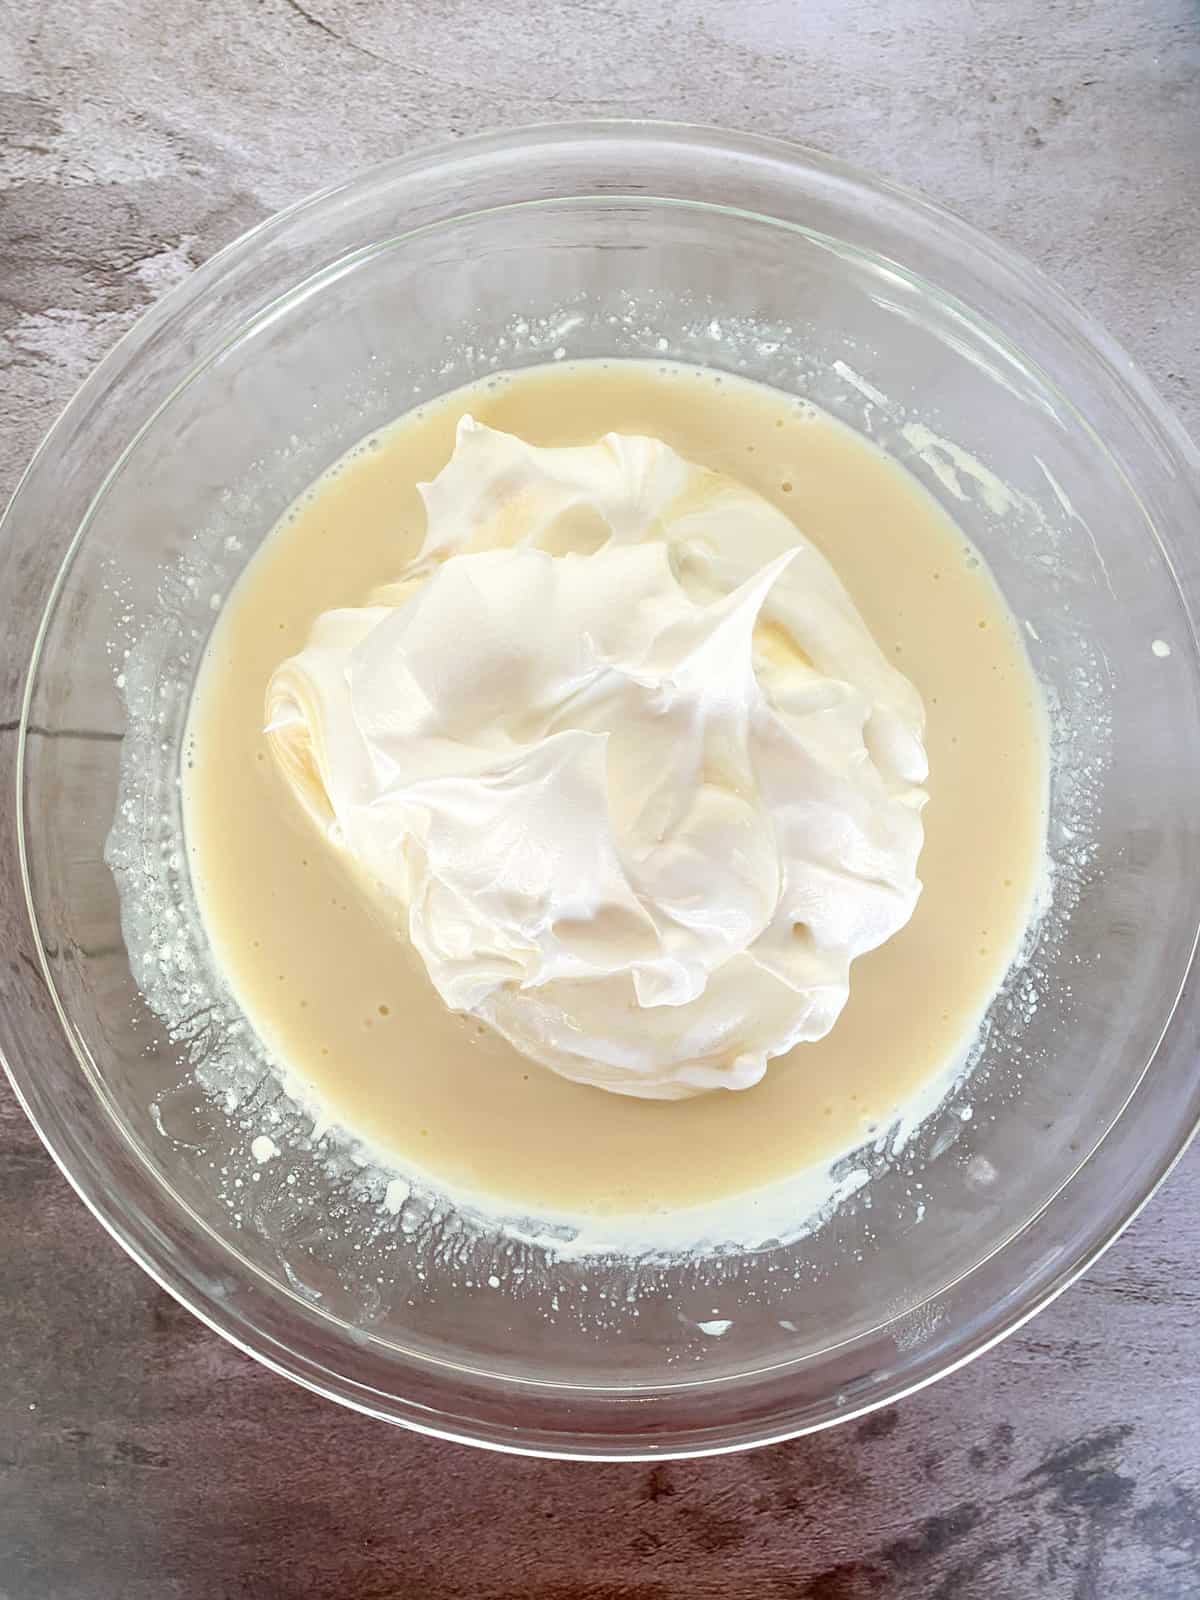 whipped cream on top of lemon mixture in a bowl